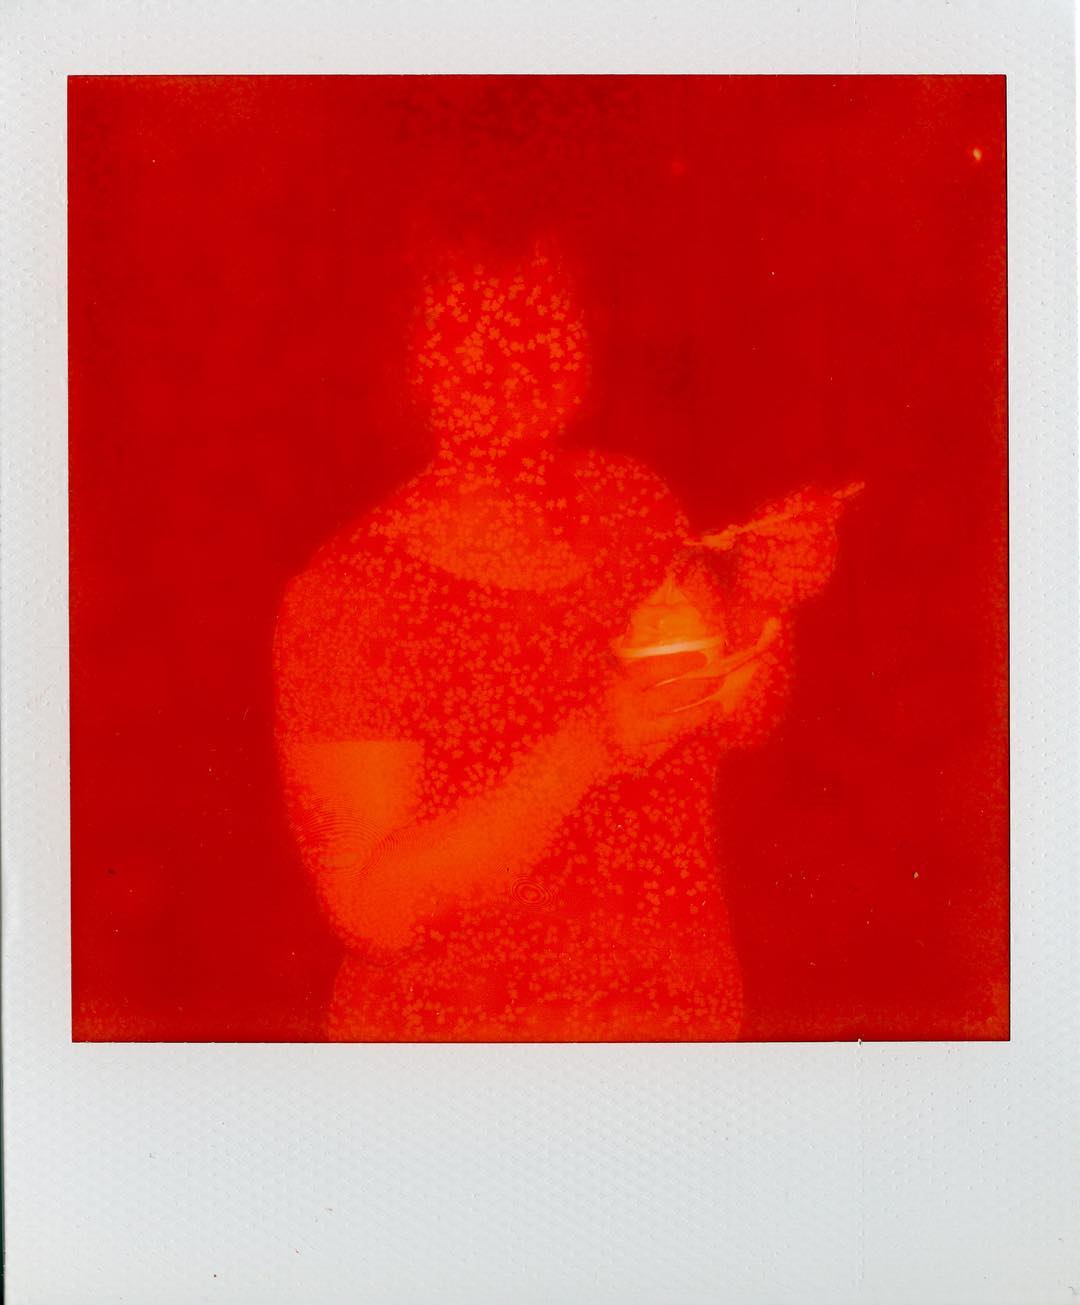 I Scream.... #aprilfailsday Early Impossible Project film, if developed too warm, could take on a red-orange hue. This shot of my lovely wife is an example. It also could develop this odd spotting that I think of as âmeaslesâ. The film has improved greatly since these days. Sometimes I think thatâs a pity. I still have a few packs of this old stuff, waiting for the next April Fails Day. #film #filmphotography #polaroid #sx70 #impossibleproject